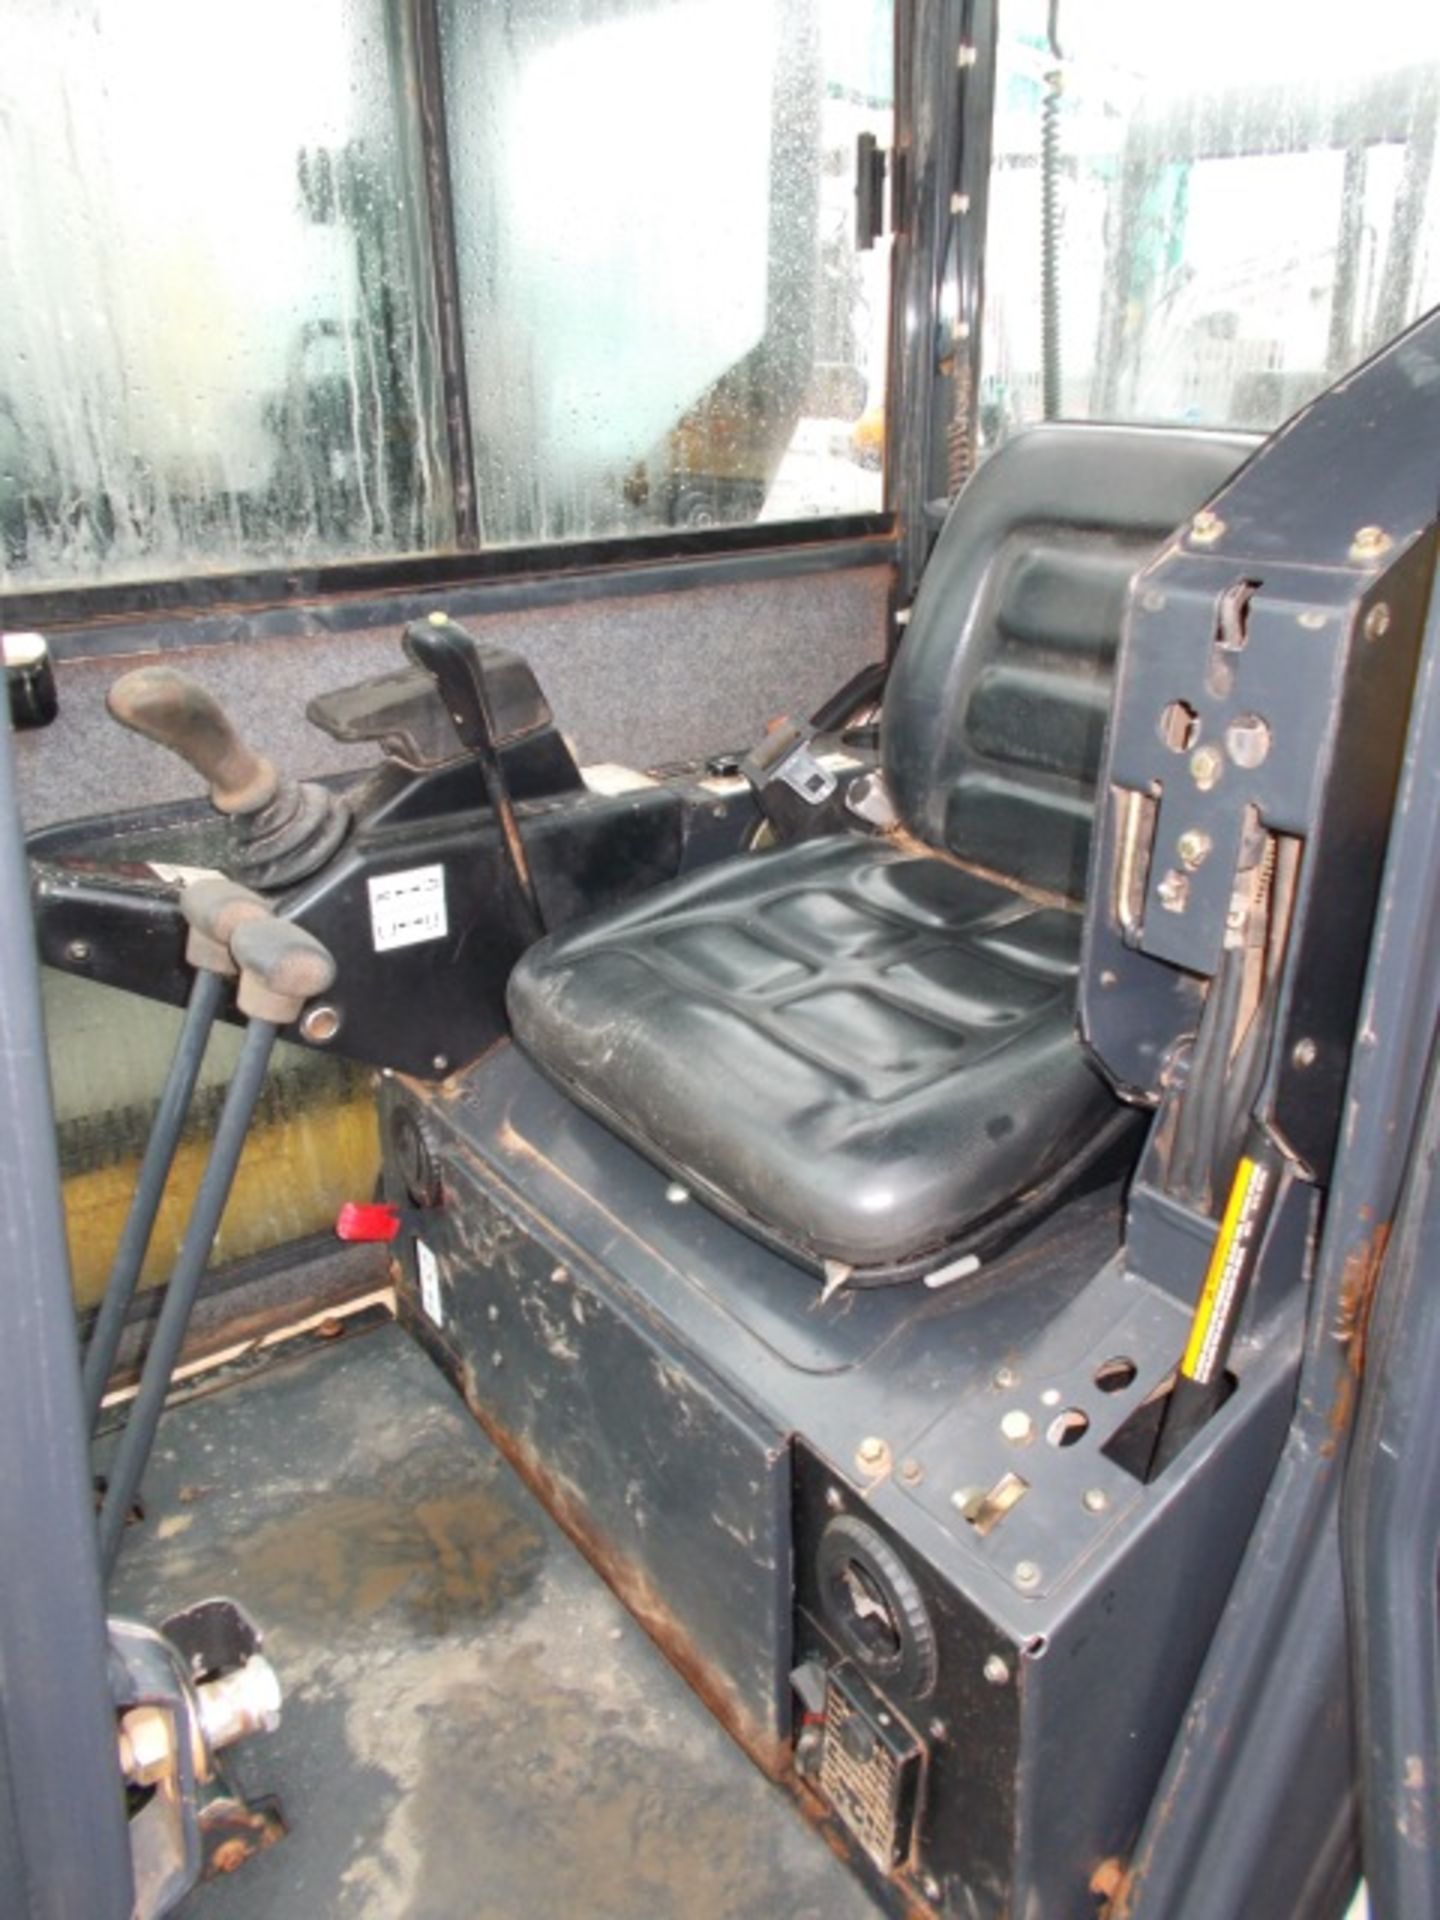 2001 BOBCAT 322D rubber tracked excavator S/n: 223513581 with bucket, blade, piped, cab & Exp tracks - Image 3 of 4